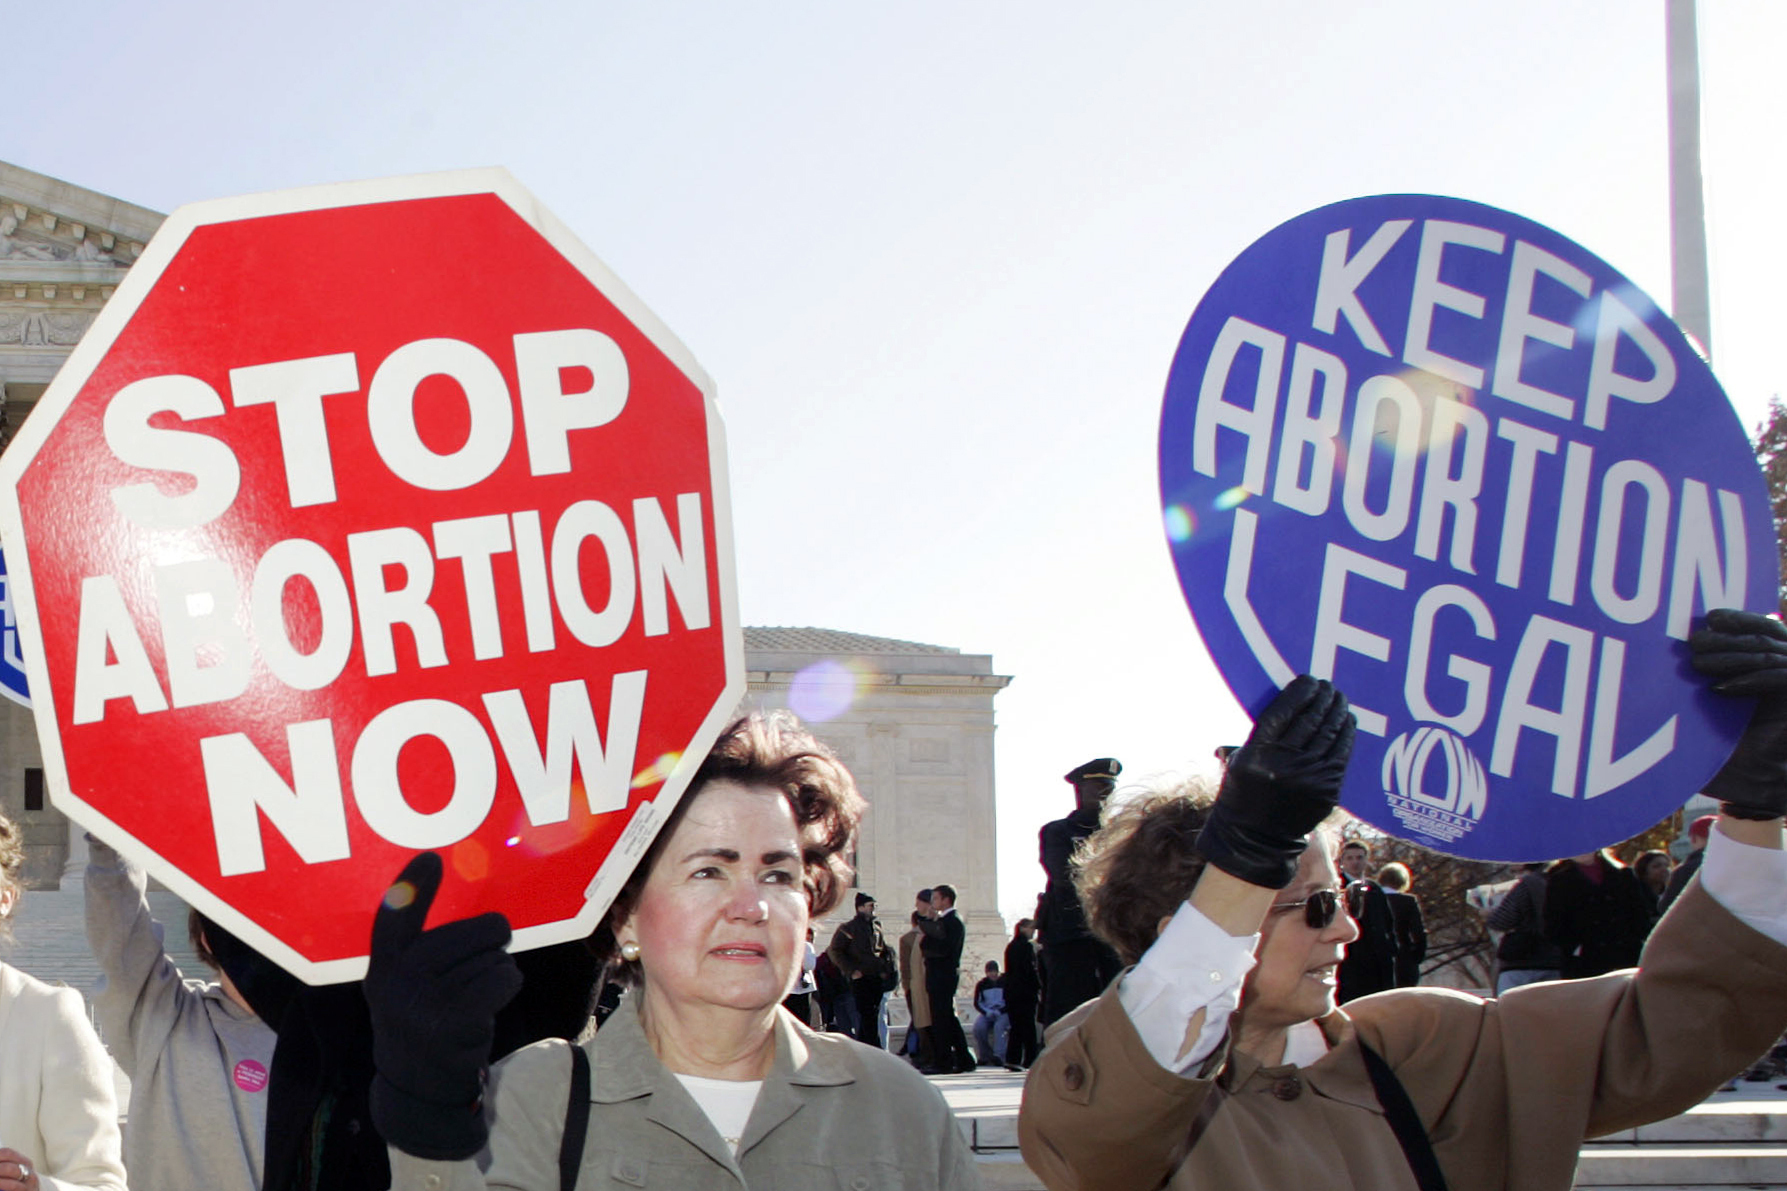 In this Nov. 30, 2005, file photo, an anti-abortion demonstrator stands next to an abortion-rights supporter outside the U.S. Supreme Court in Washington. (AP Photo/Manuel Balce Ceneta)